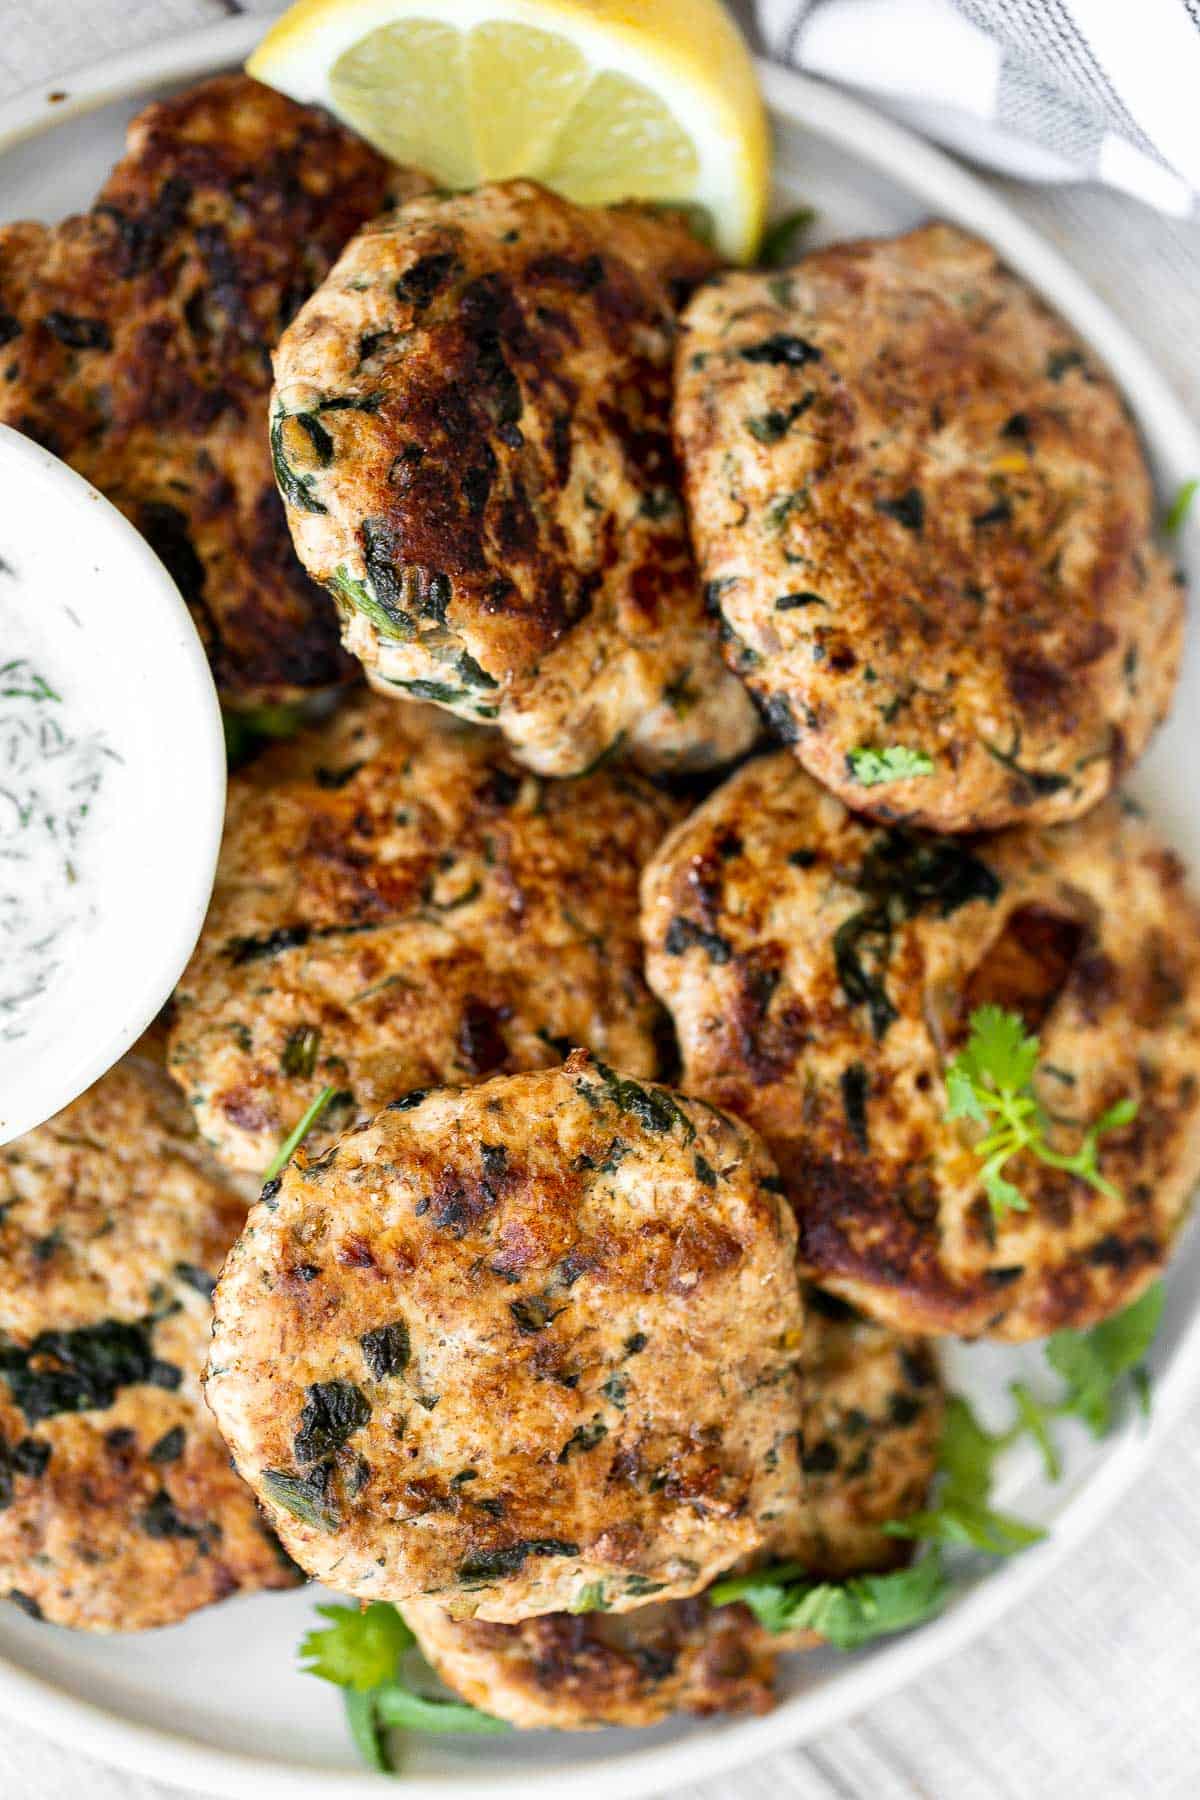 Delicious, moist and juicy Mediterranean chicken patties have everything you want in one bite: protein, veggies, herbs, and they're quick and easy to make. | aheadofthyme.com